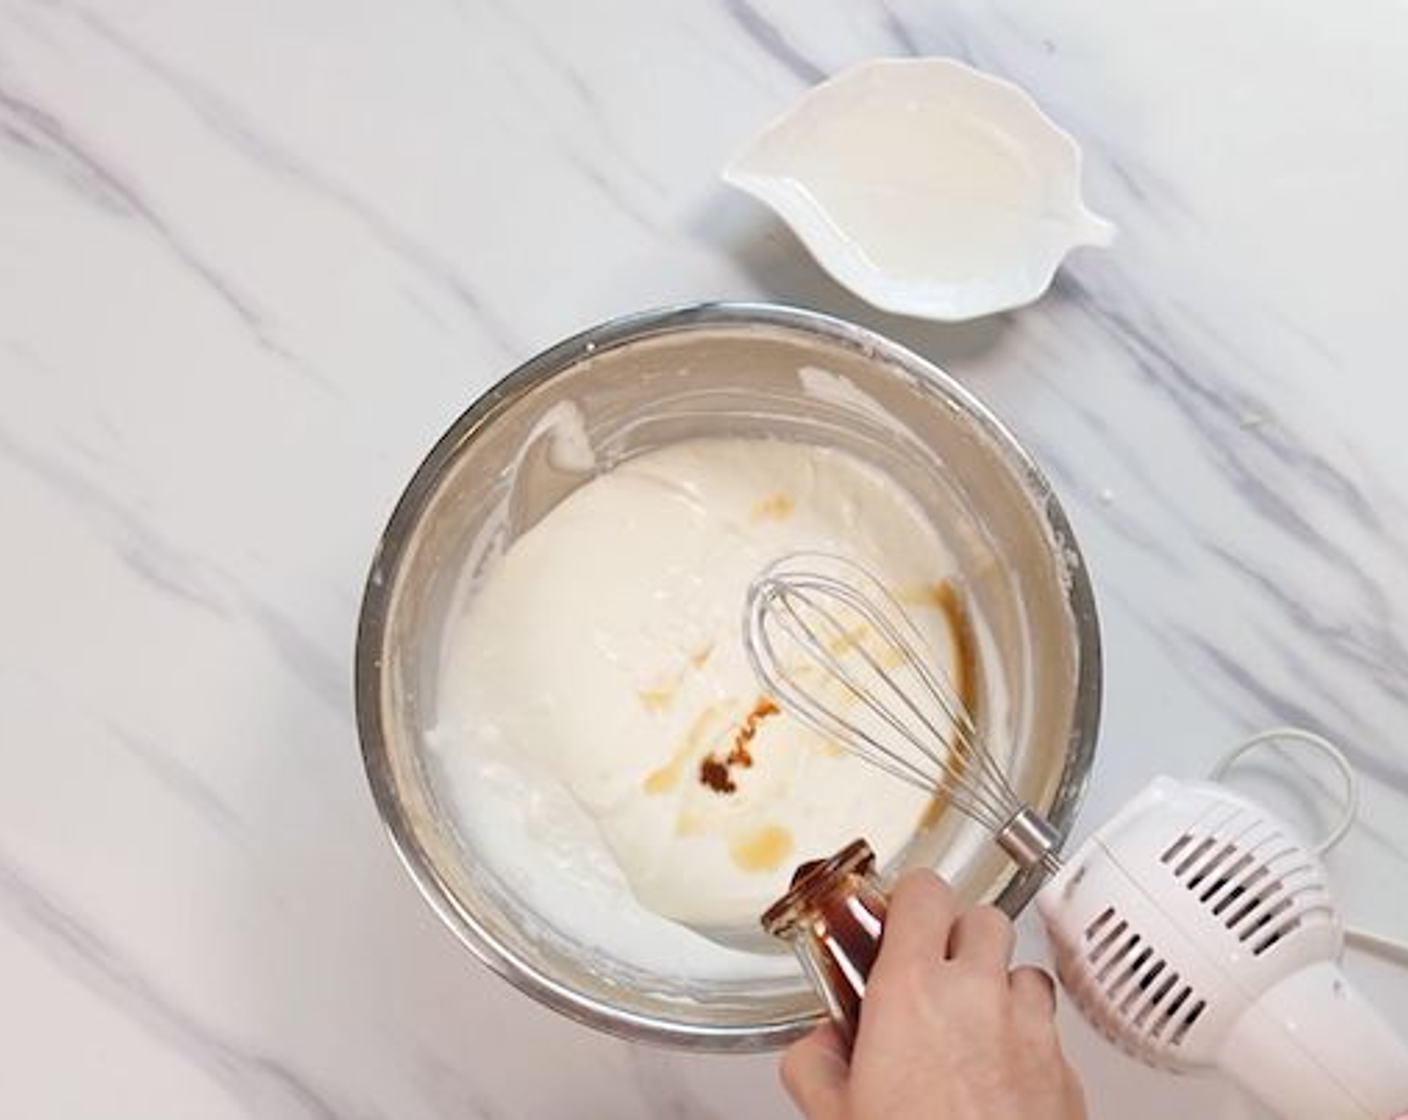 step 3 Drizzle in Heavy Cream (3/4 cup) into the cream cheese mixture and whip until the mixture is thickened. Flavor it with some Rum (2 Tbsp) and Vanilla Extract (1 tsp). Continue beating until the mixture thickens back, leaving a ripple effect when it’s being mixed.